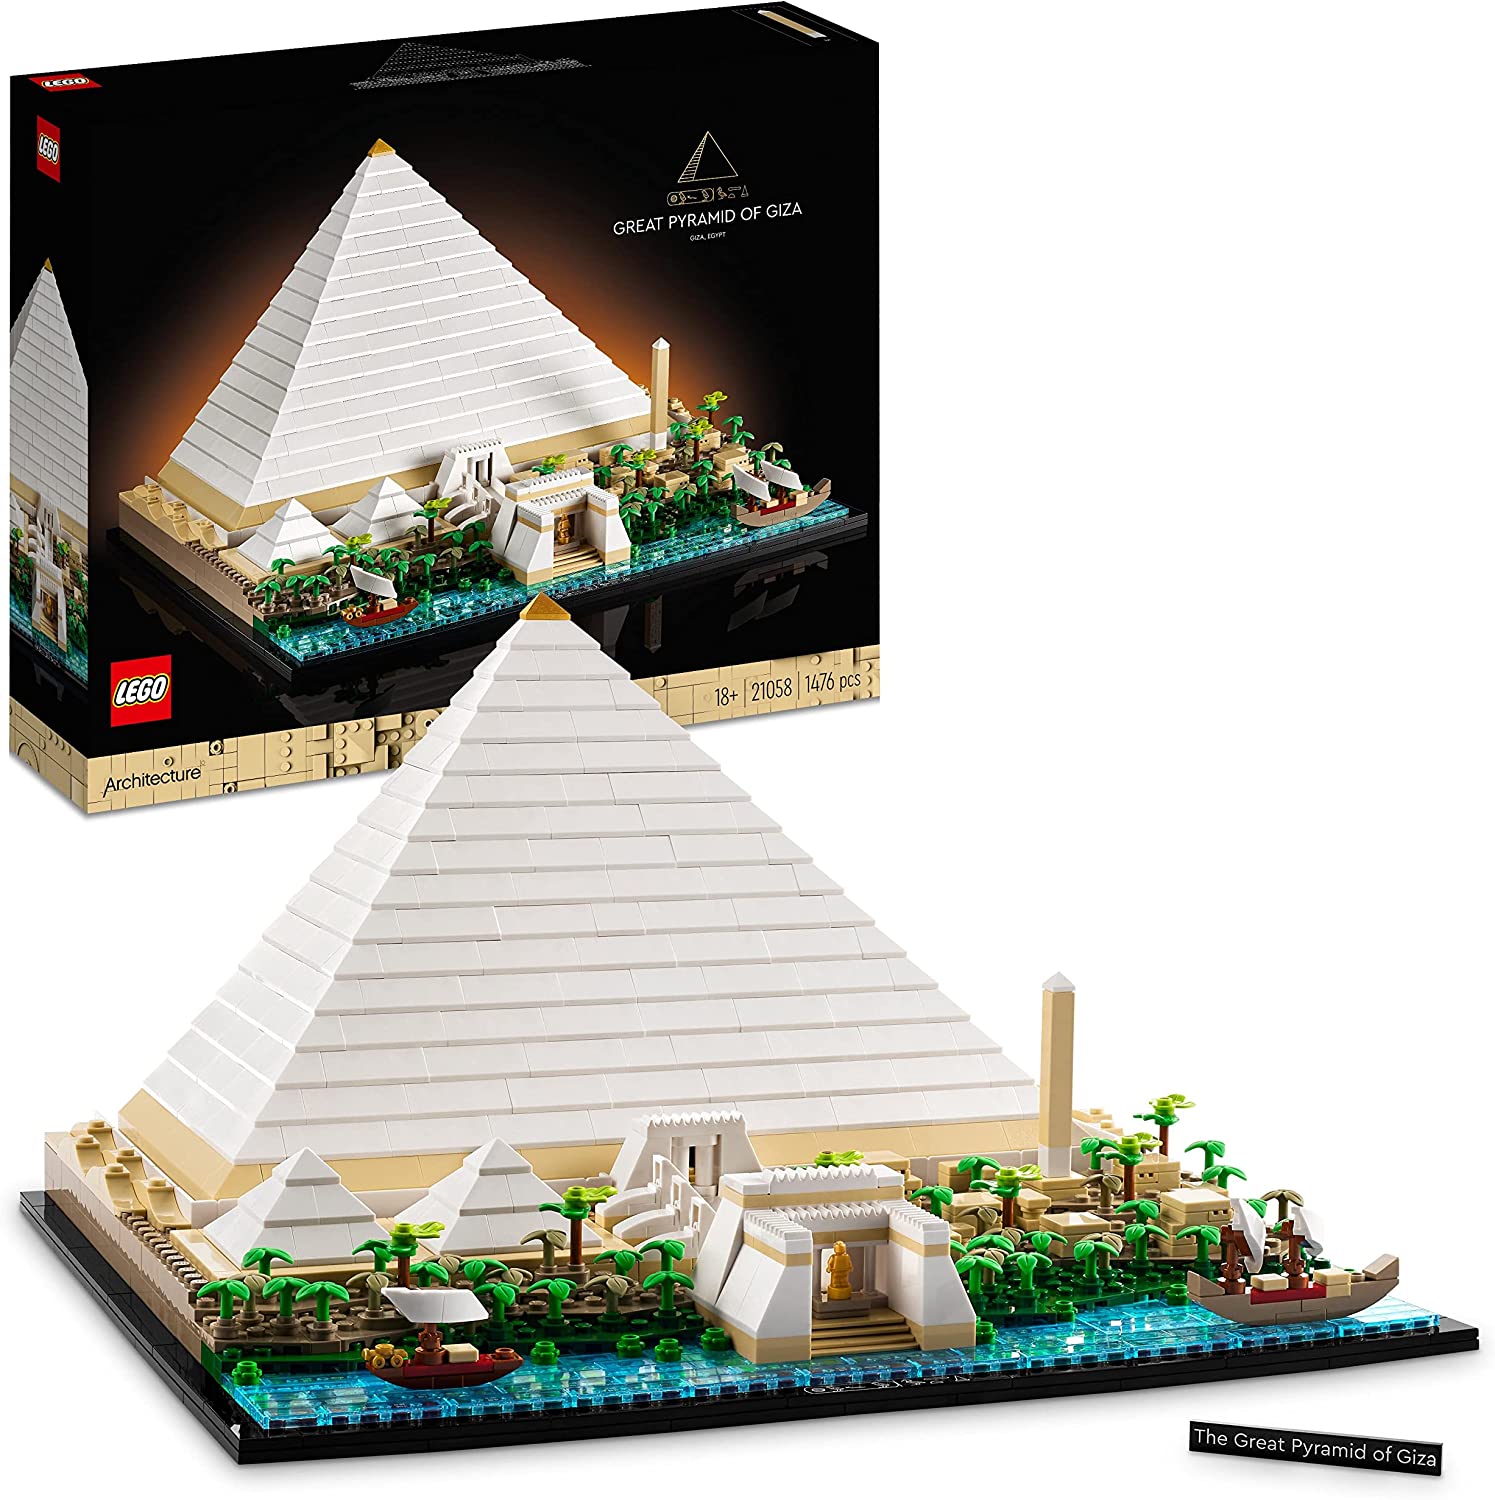 LEGO 21058 Architecture Cheops Pyramid Construction Kit for Adults for Crafts as Creative Hobbies, Home and Office Decoration